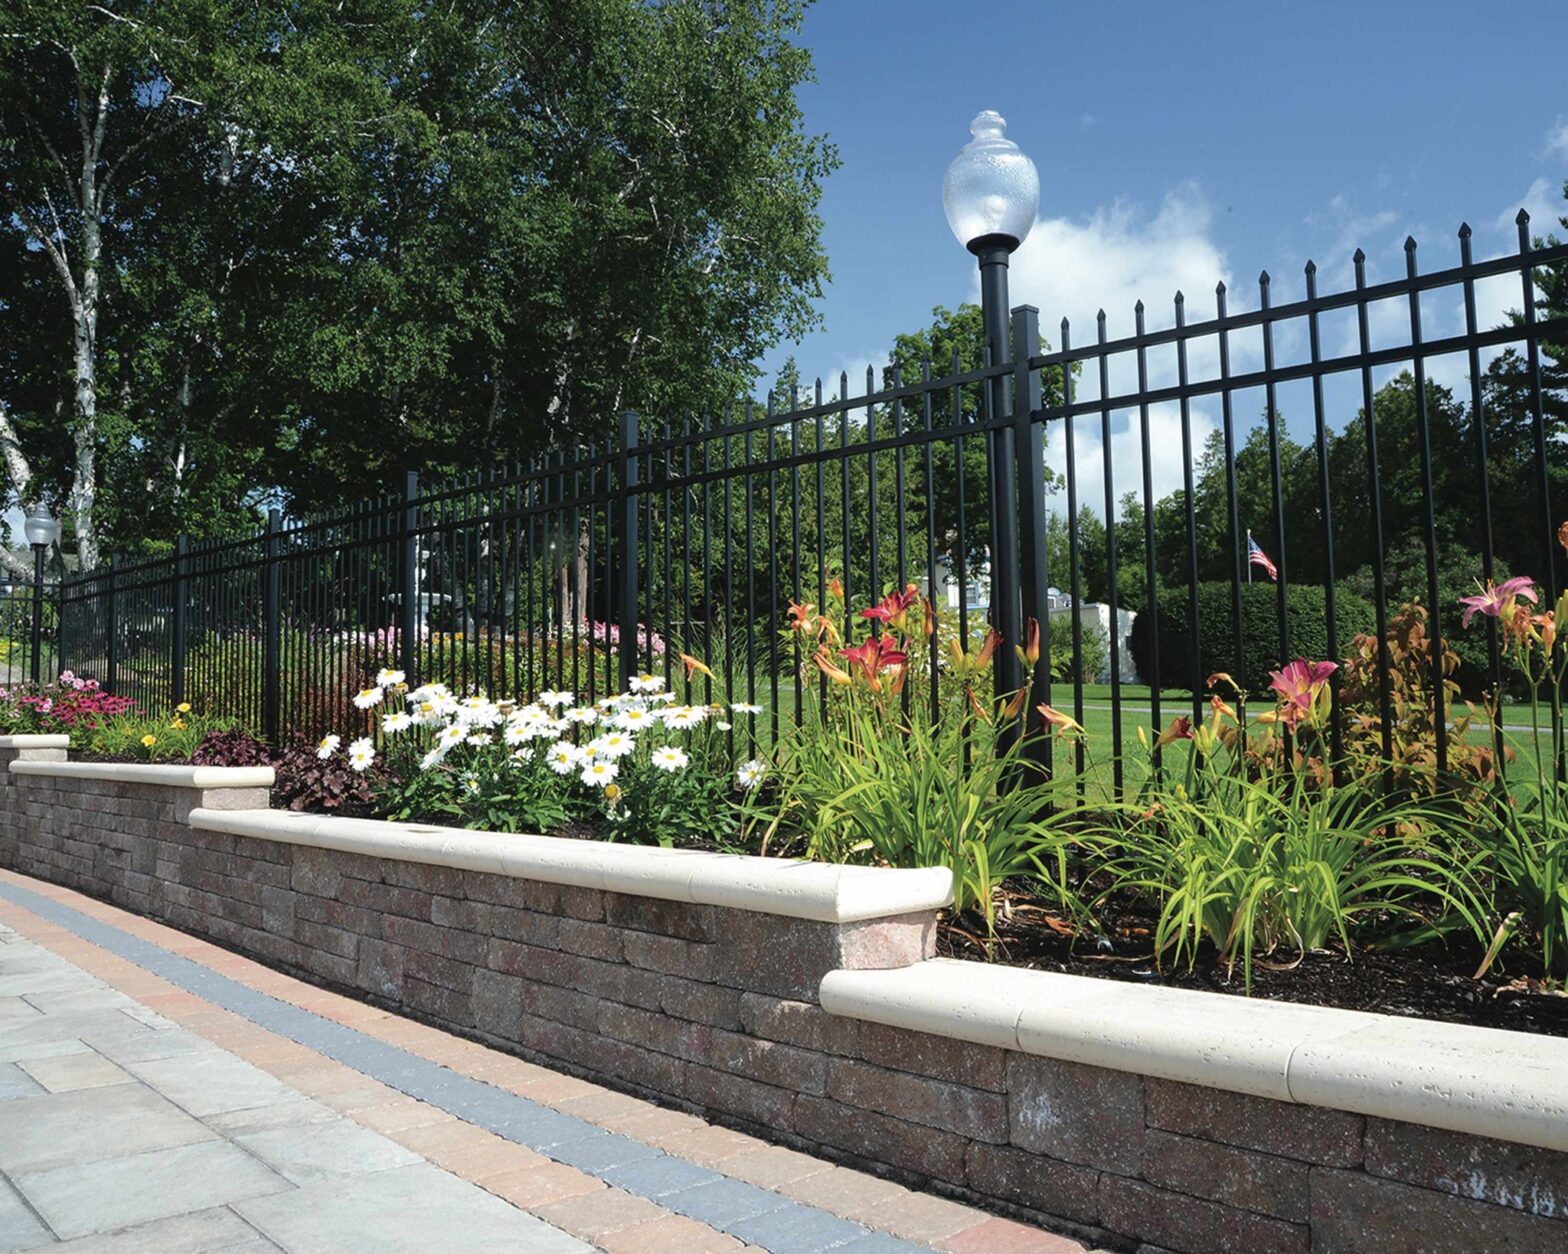 Photo of commercial aluminum fence in Methuen, Massachusetts by Hulme Fence